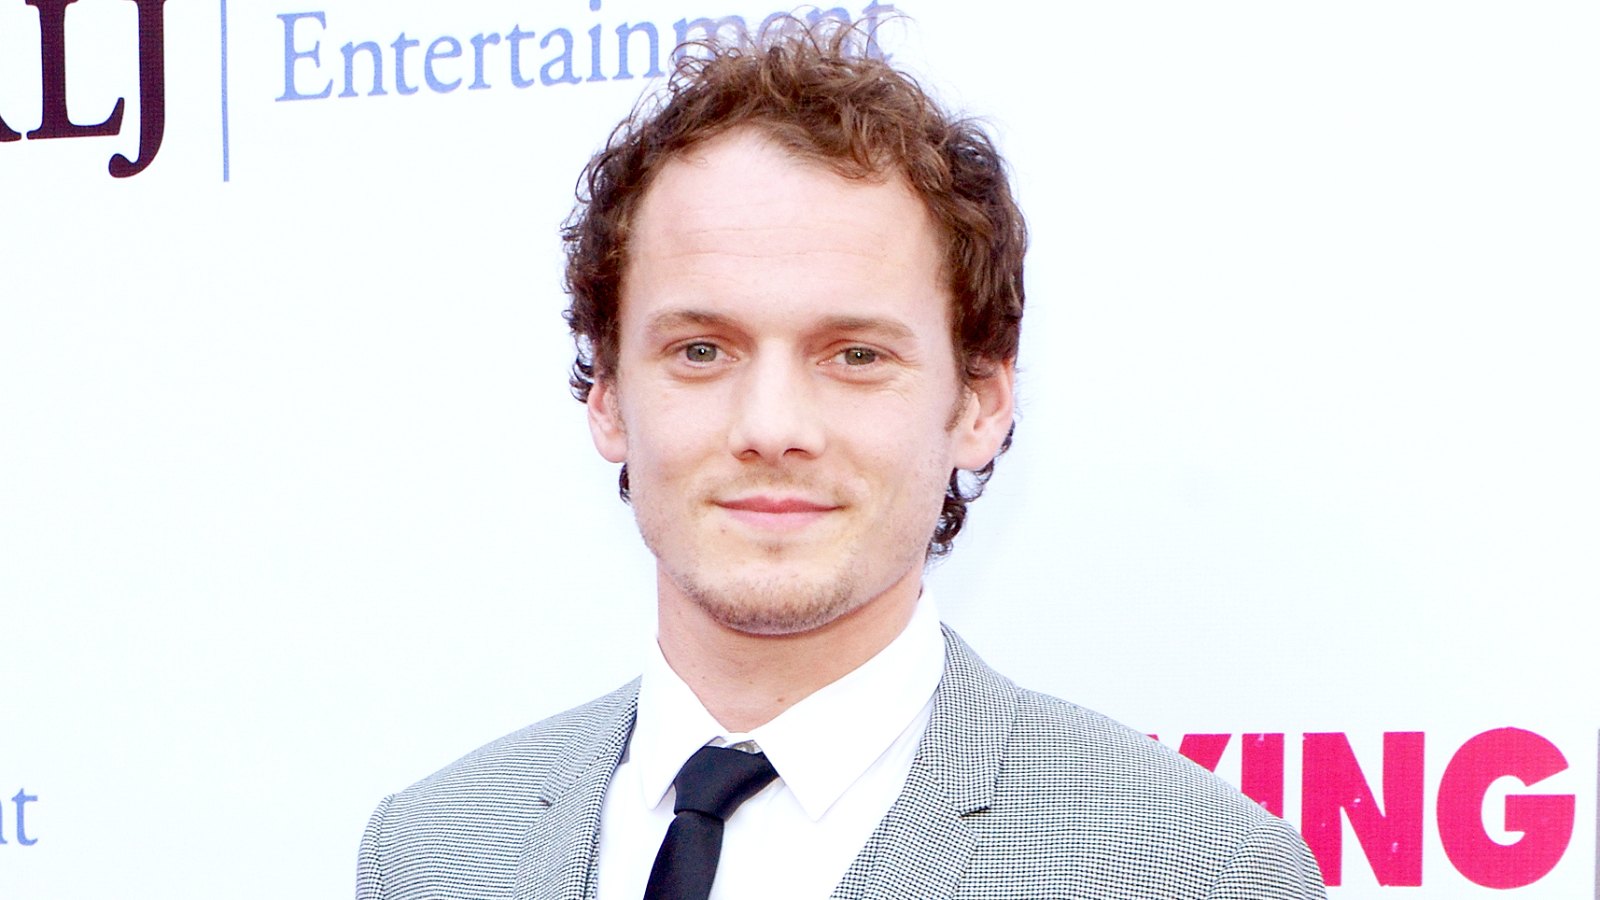 Anton Yelchin attends a special advance screening of Joe Dante's "Burying The Ex" at American Cinematheque's Egyptian Theatre on June 11, 2015 in Hollywood, California.